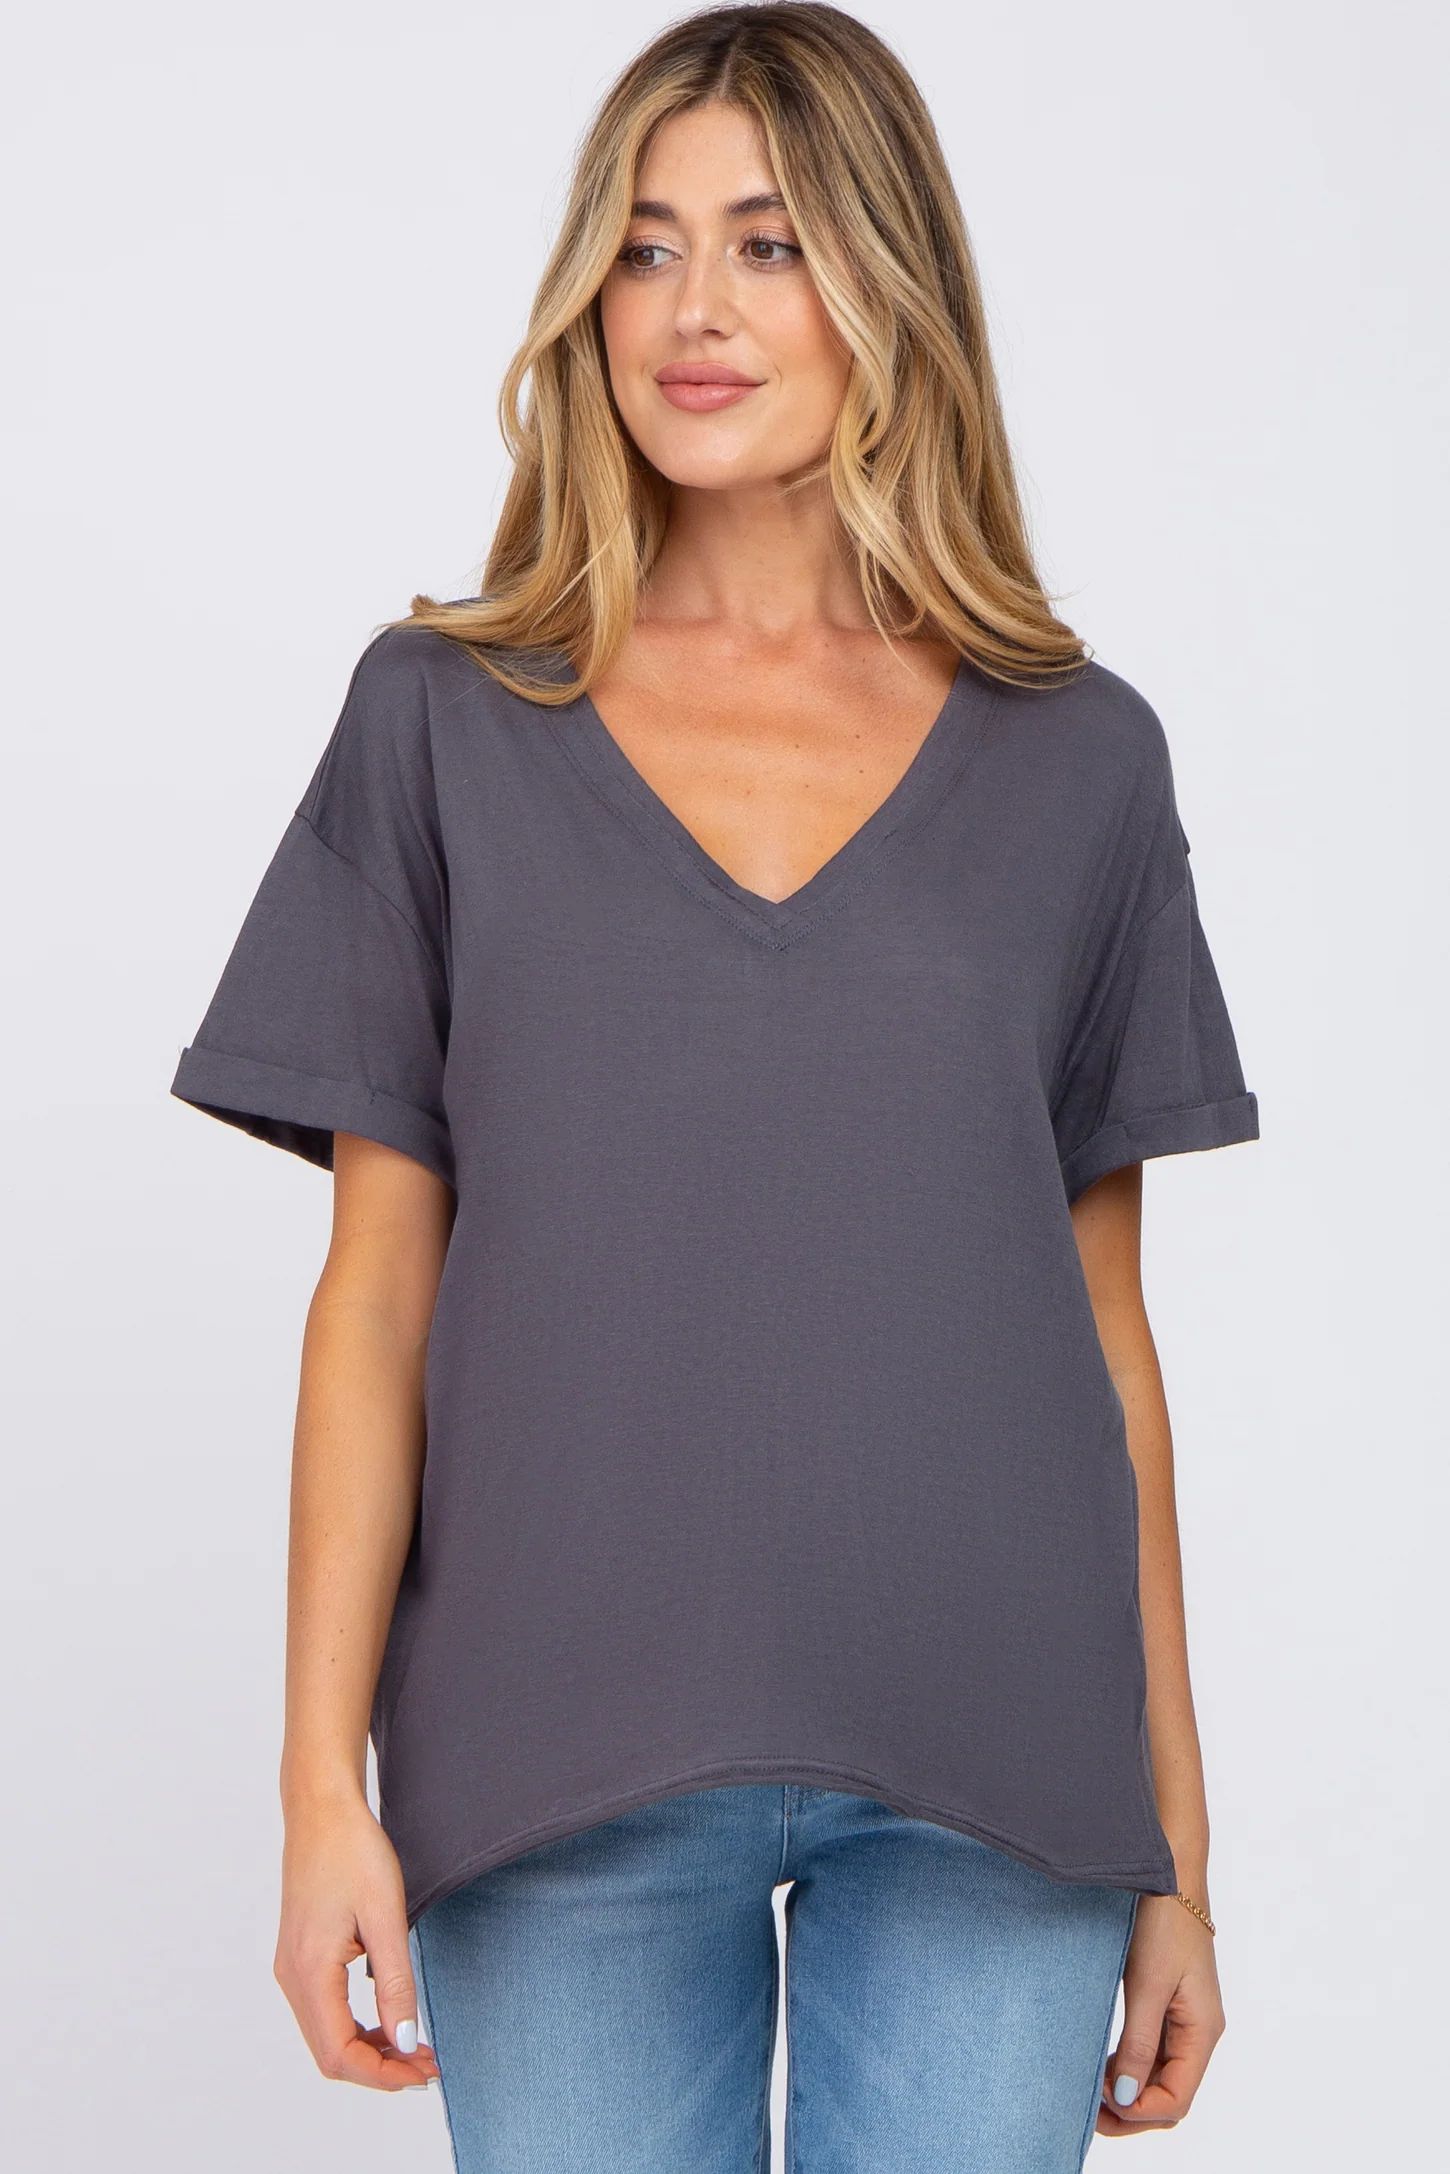 Charcoal Basic Rolled Short Sleeve Maternity Top | PinkBlush Maternity